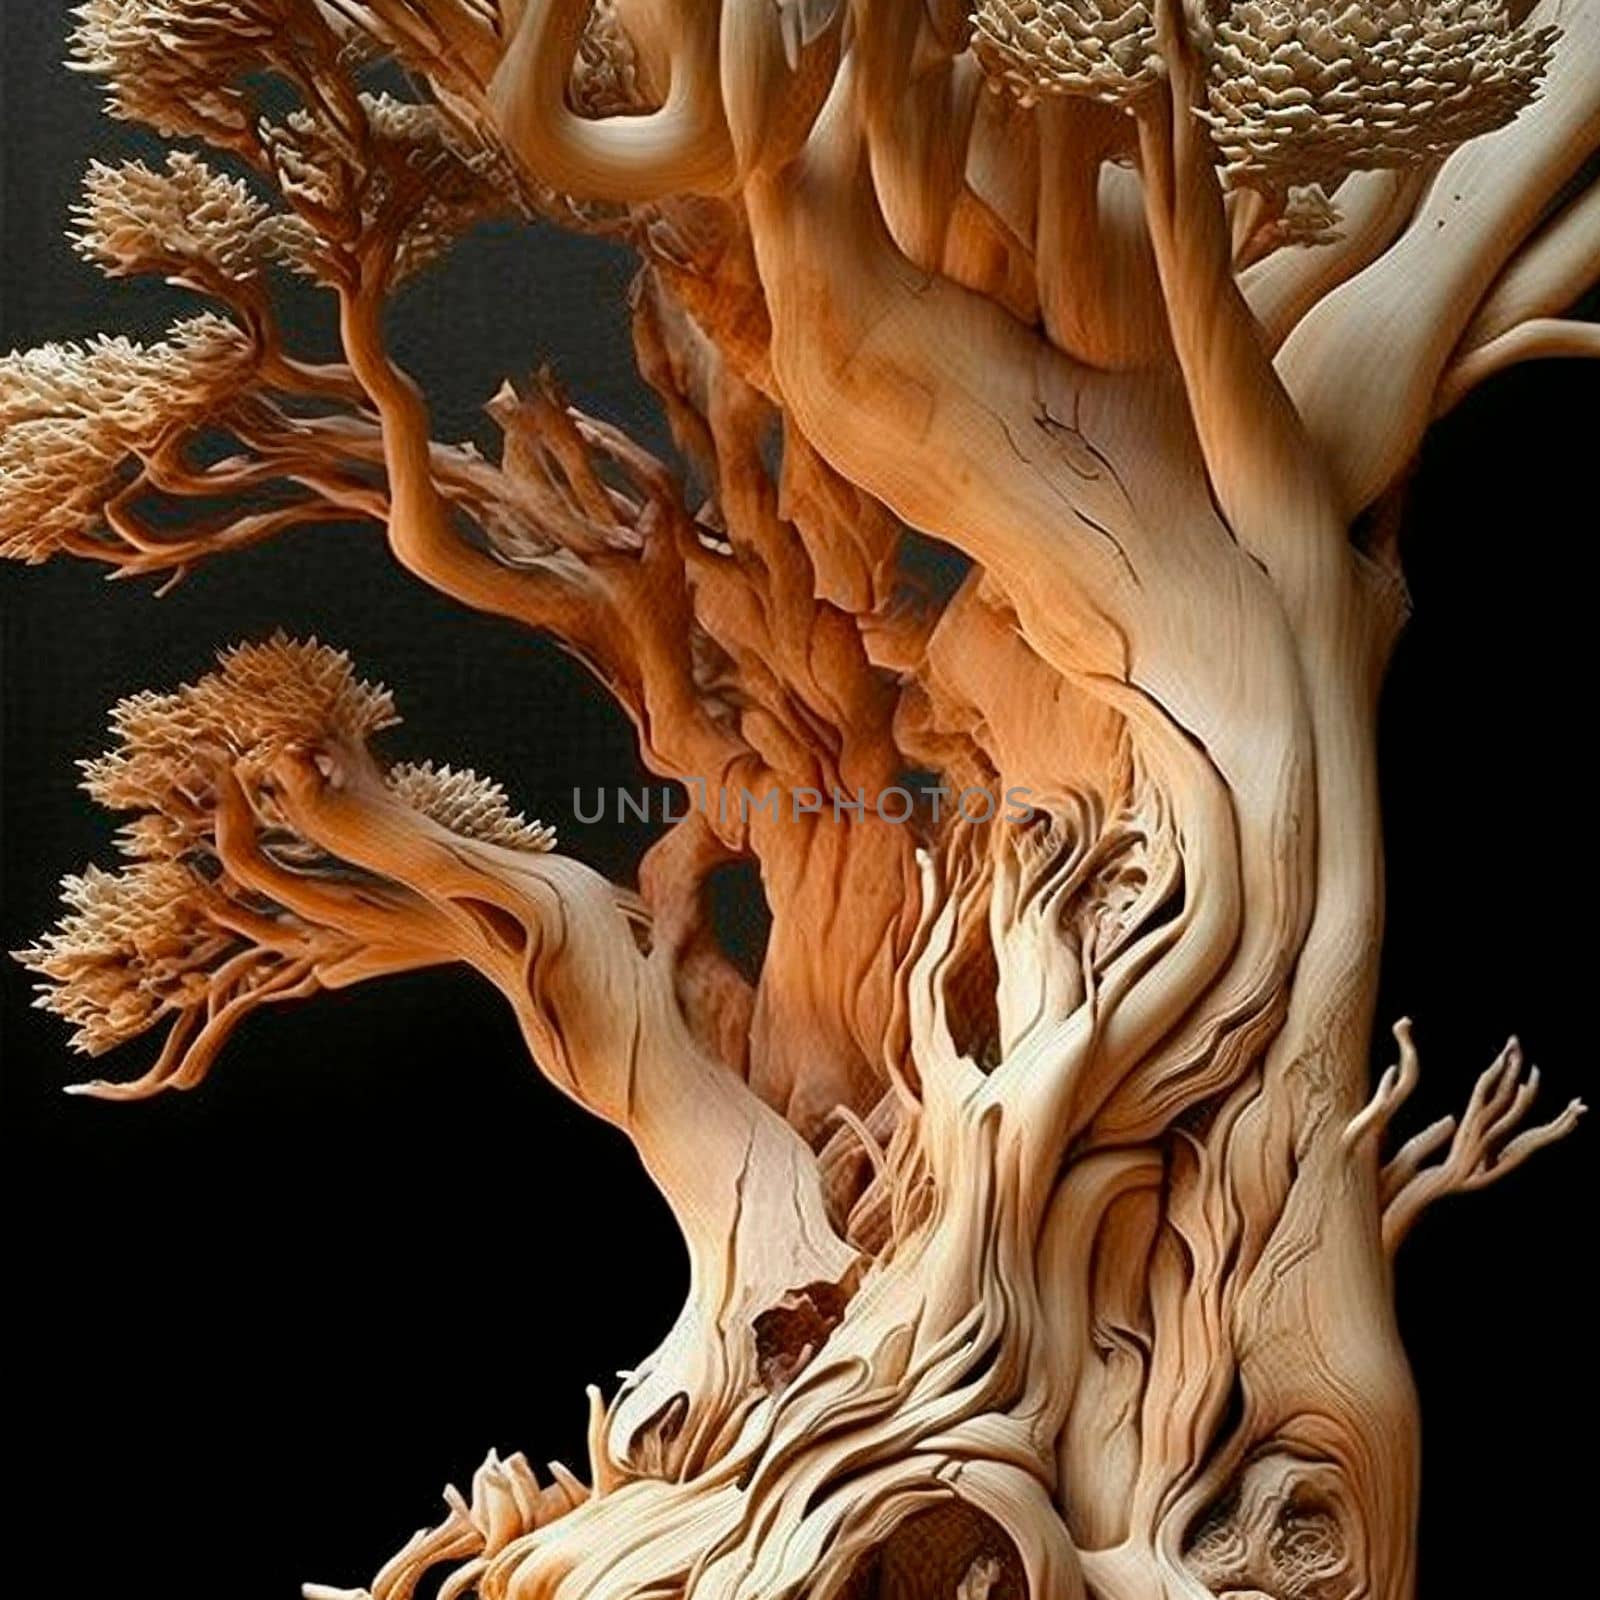 a mock-up of a tree carved out of wood. High quality illustration